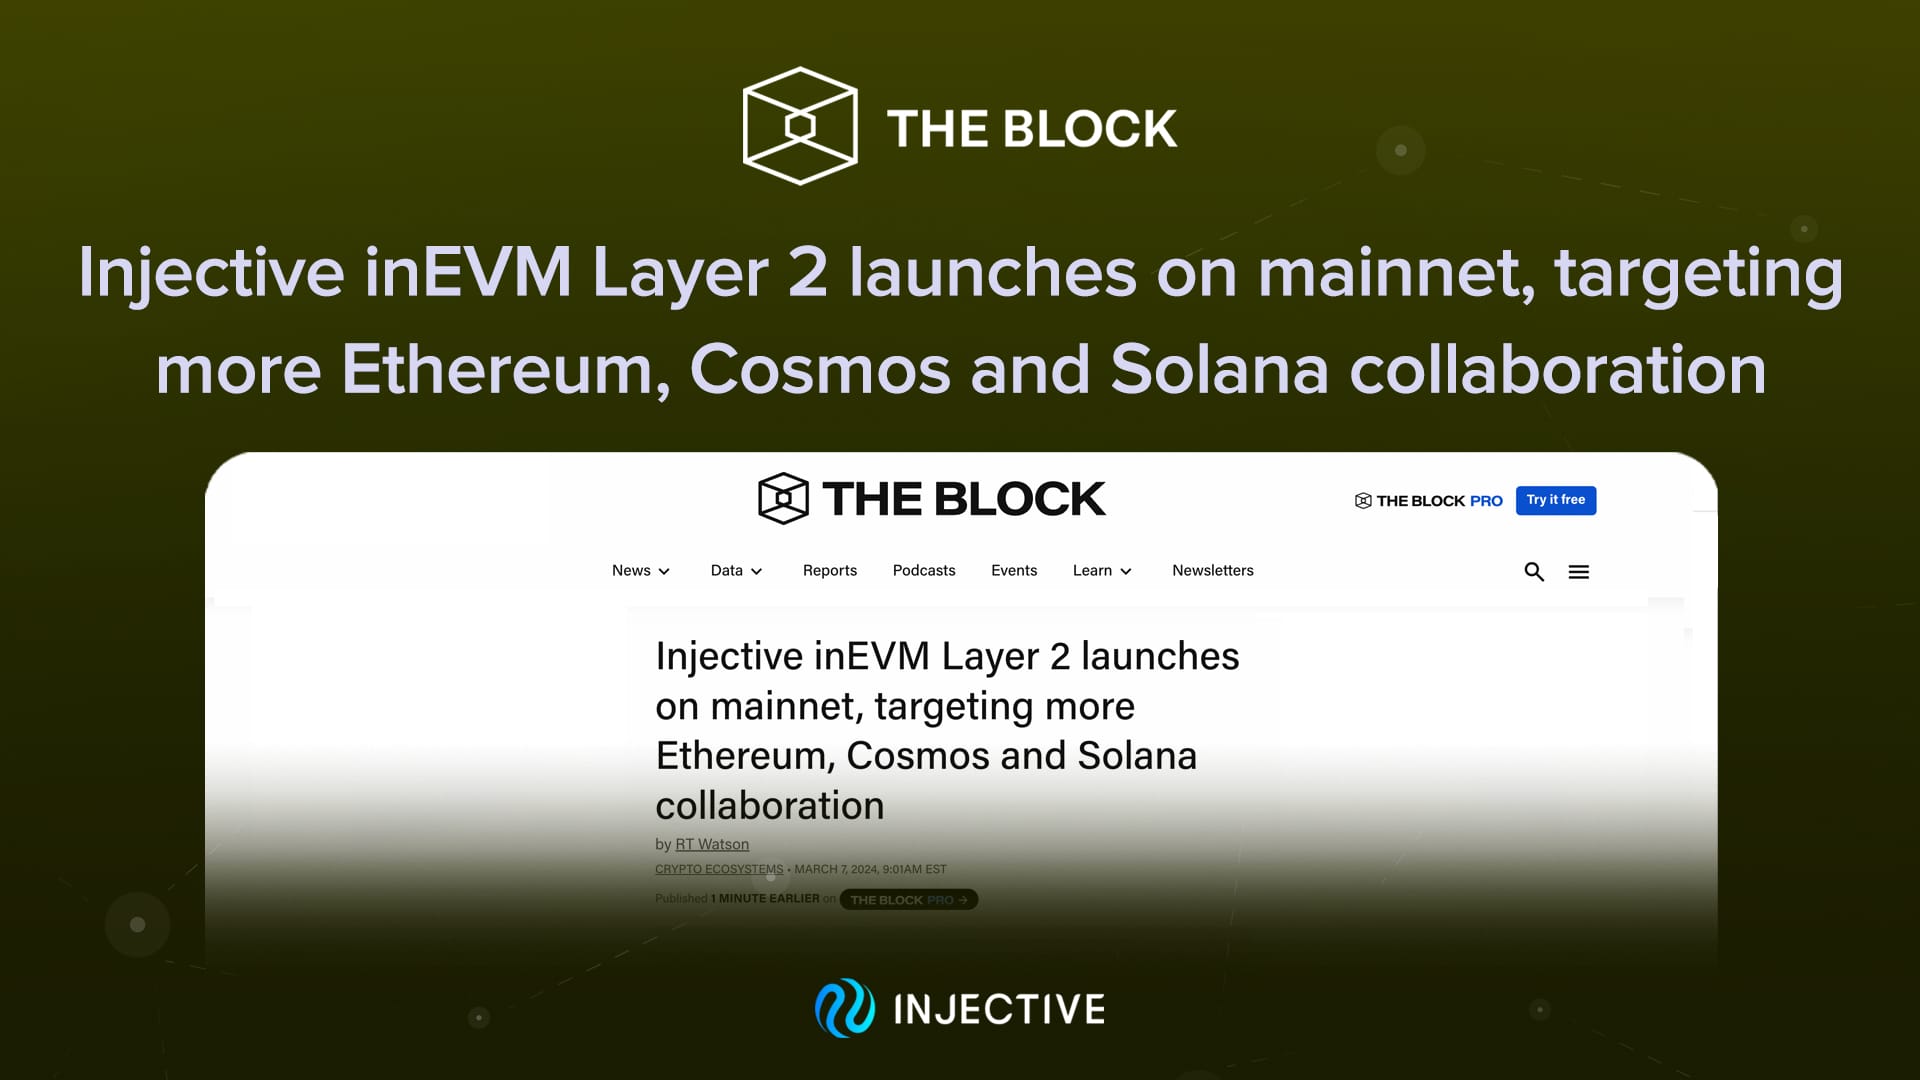 (The Block) Injective inEVM Layer 2 launches on mainnet, targeting more Ethereum, Cosmos and Solana collaboration